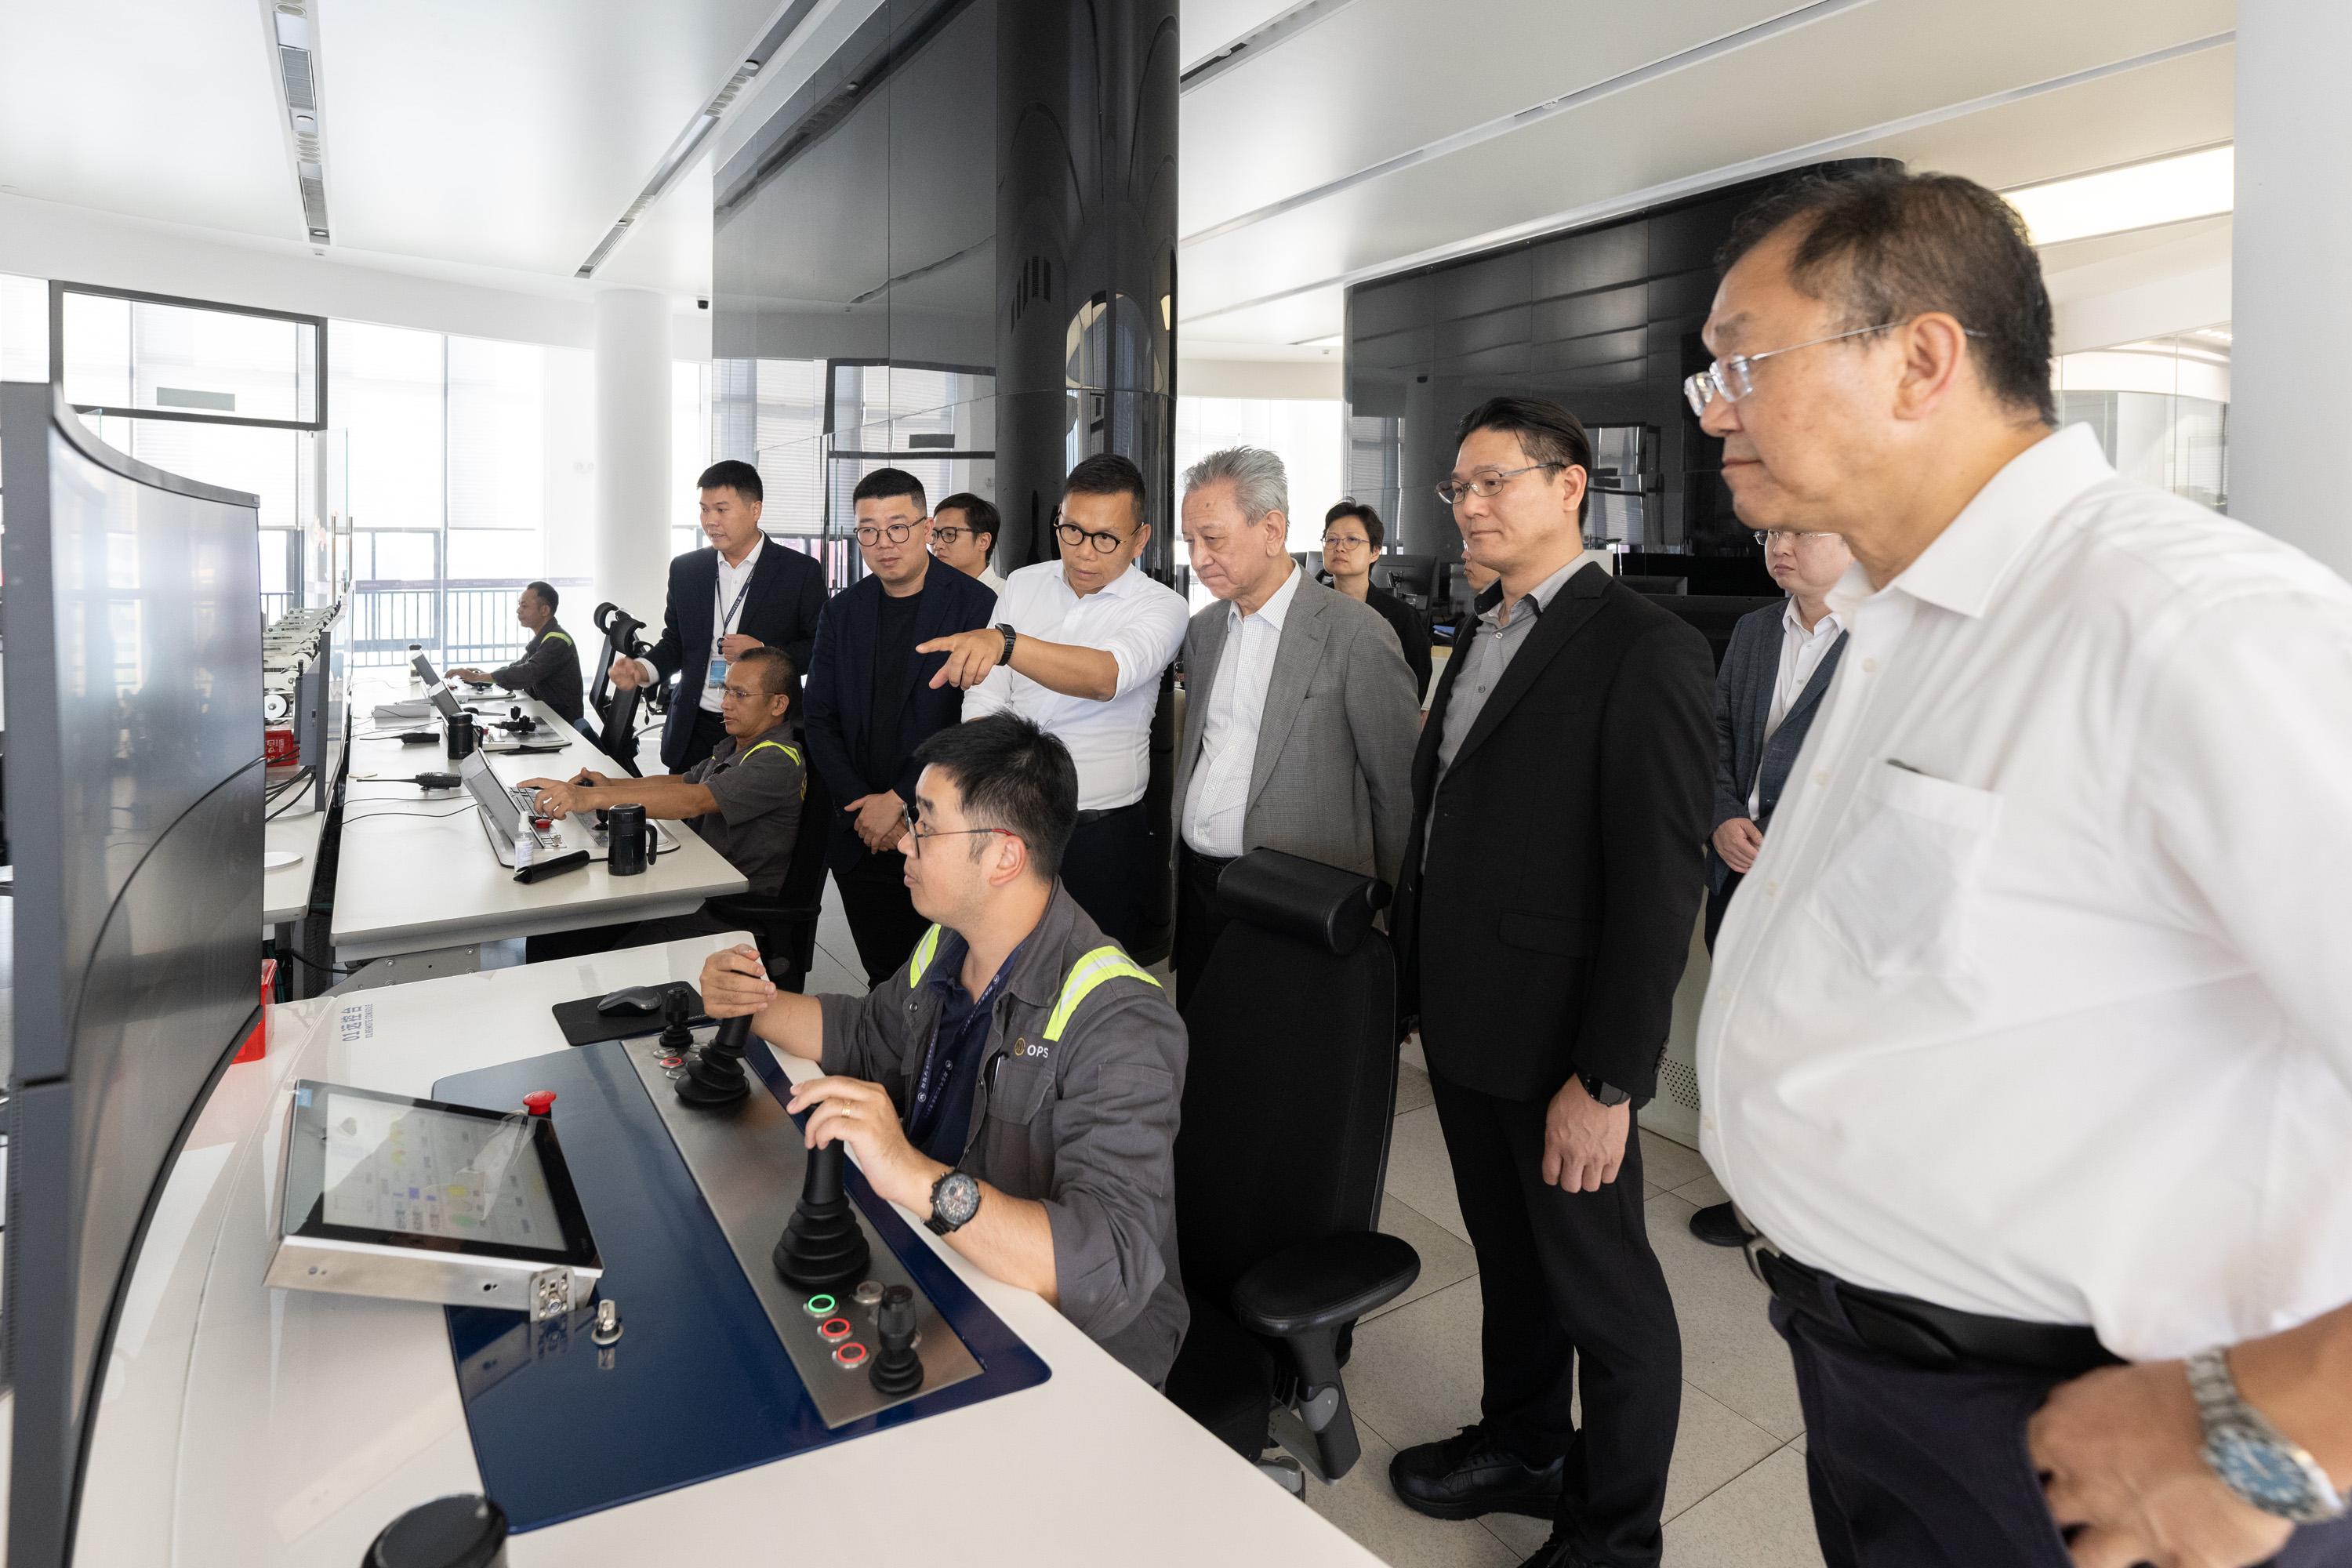 The Legislative Council (LegCo) Subcommittee on Matters Relating to the Development of the Northern Metropolis conducted a duty visit to Shenzhen today (May 16). LegCo Members observed the operation of Mawan Smart Port.